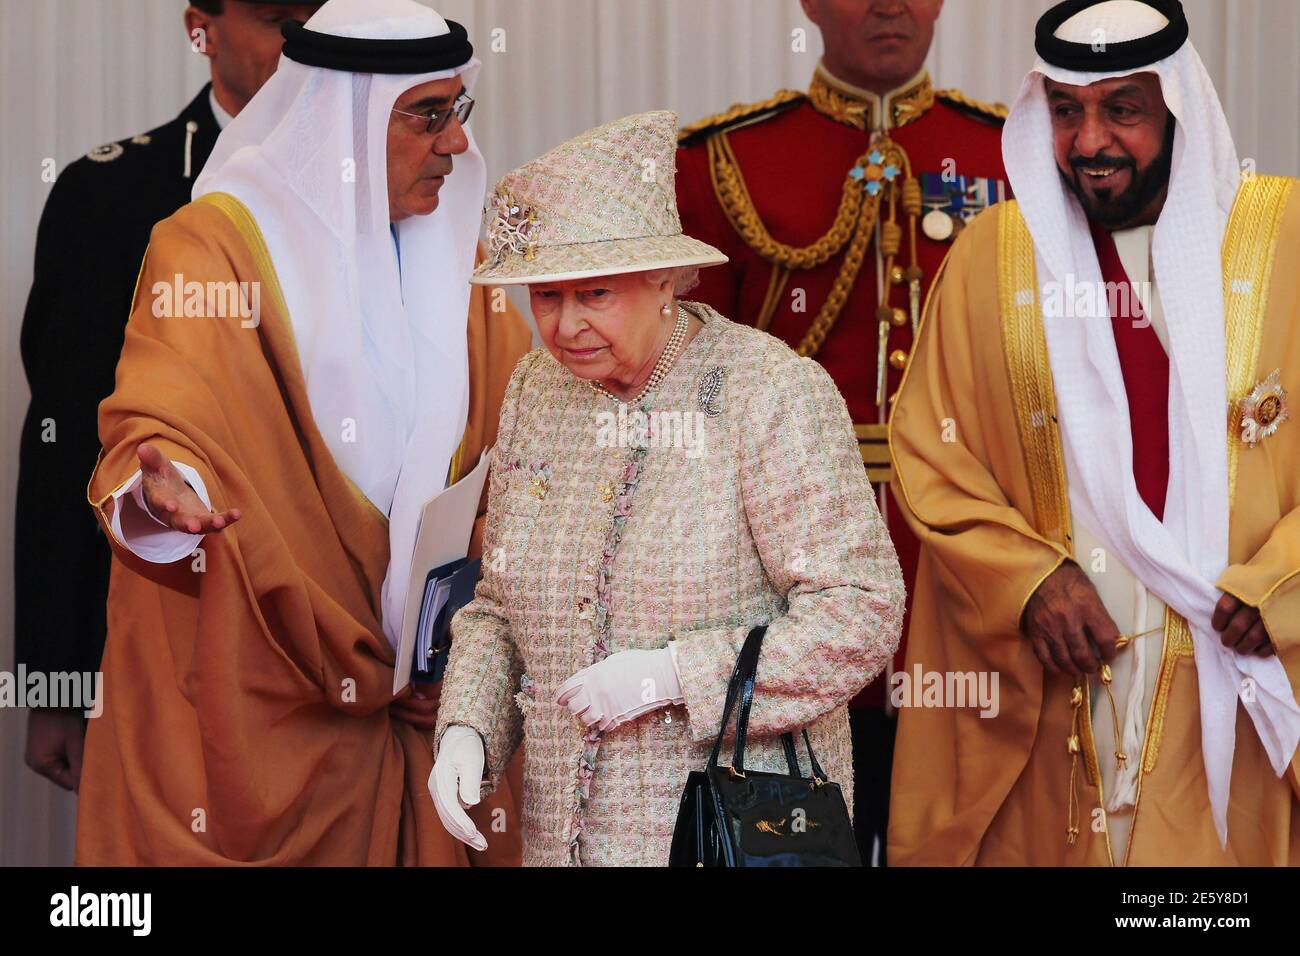 Page 2 - Khalifa Bin Zayed Al Nahayan High Resolution Stock Photography and  Images - Alamy